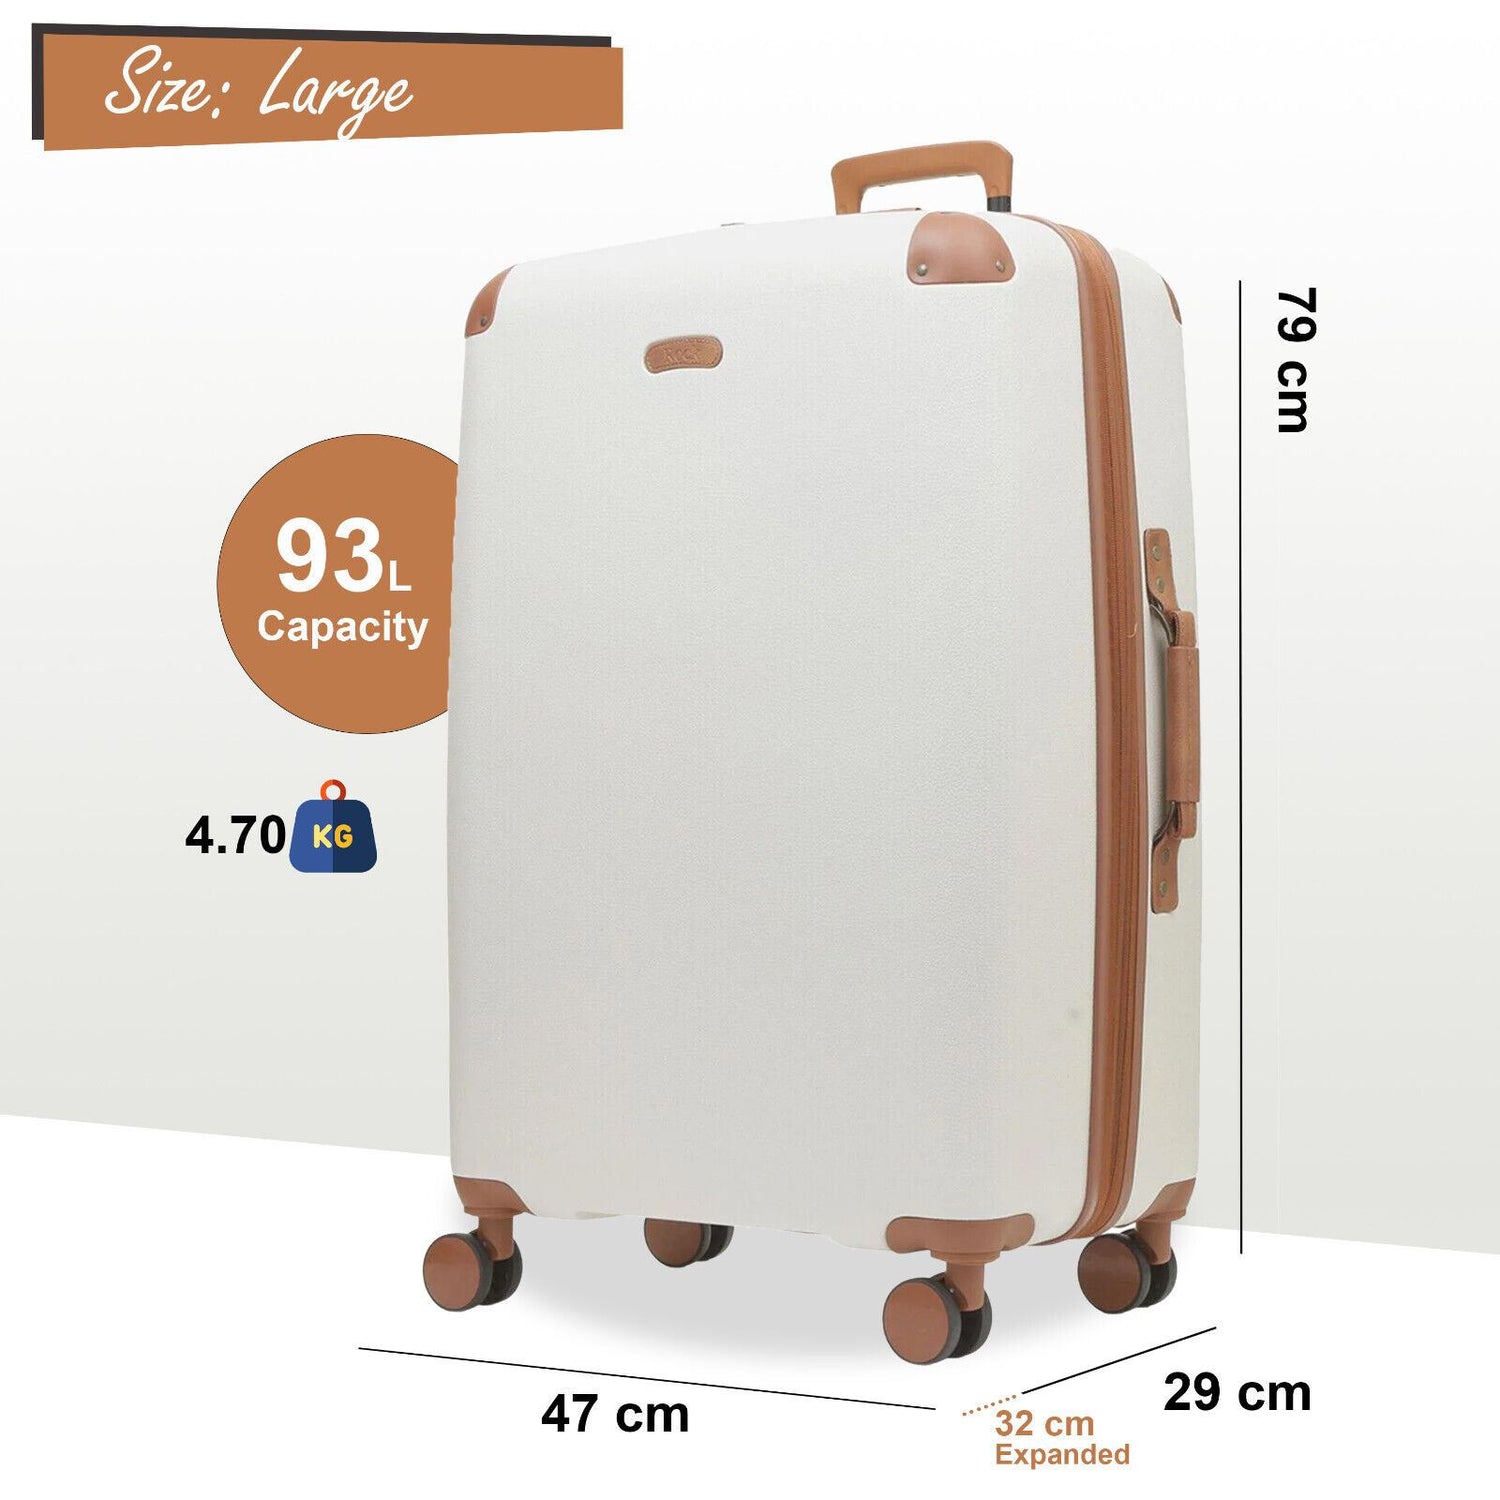 Anderson Large Hard Shell Suitcase in Cream